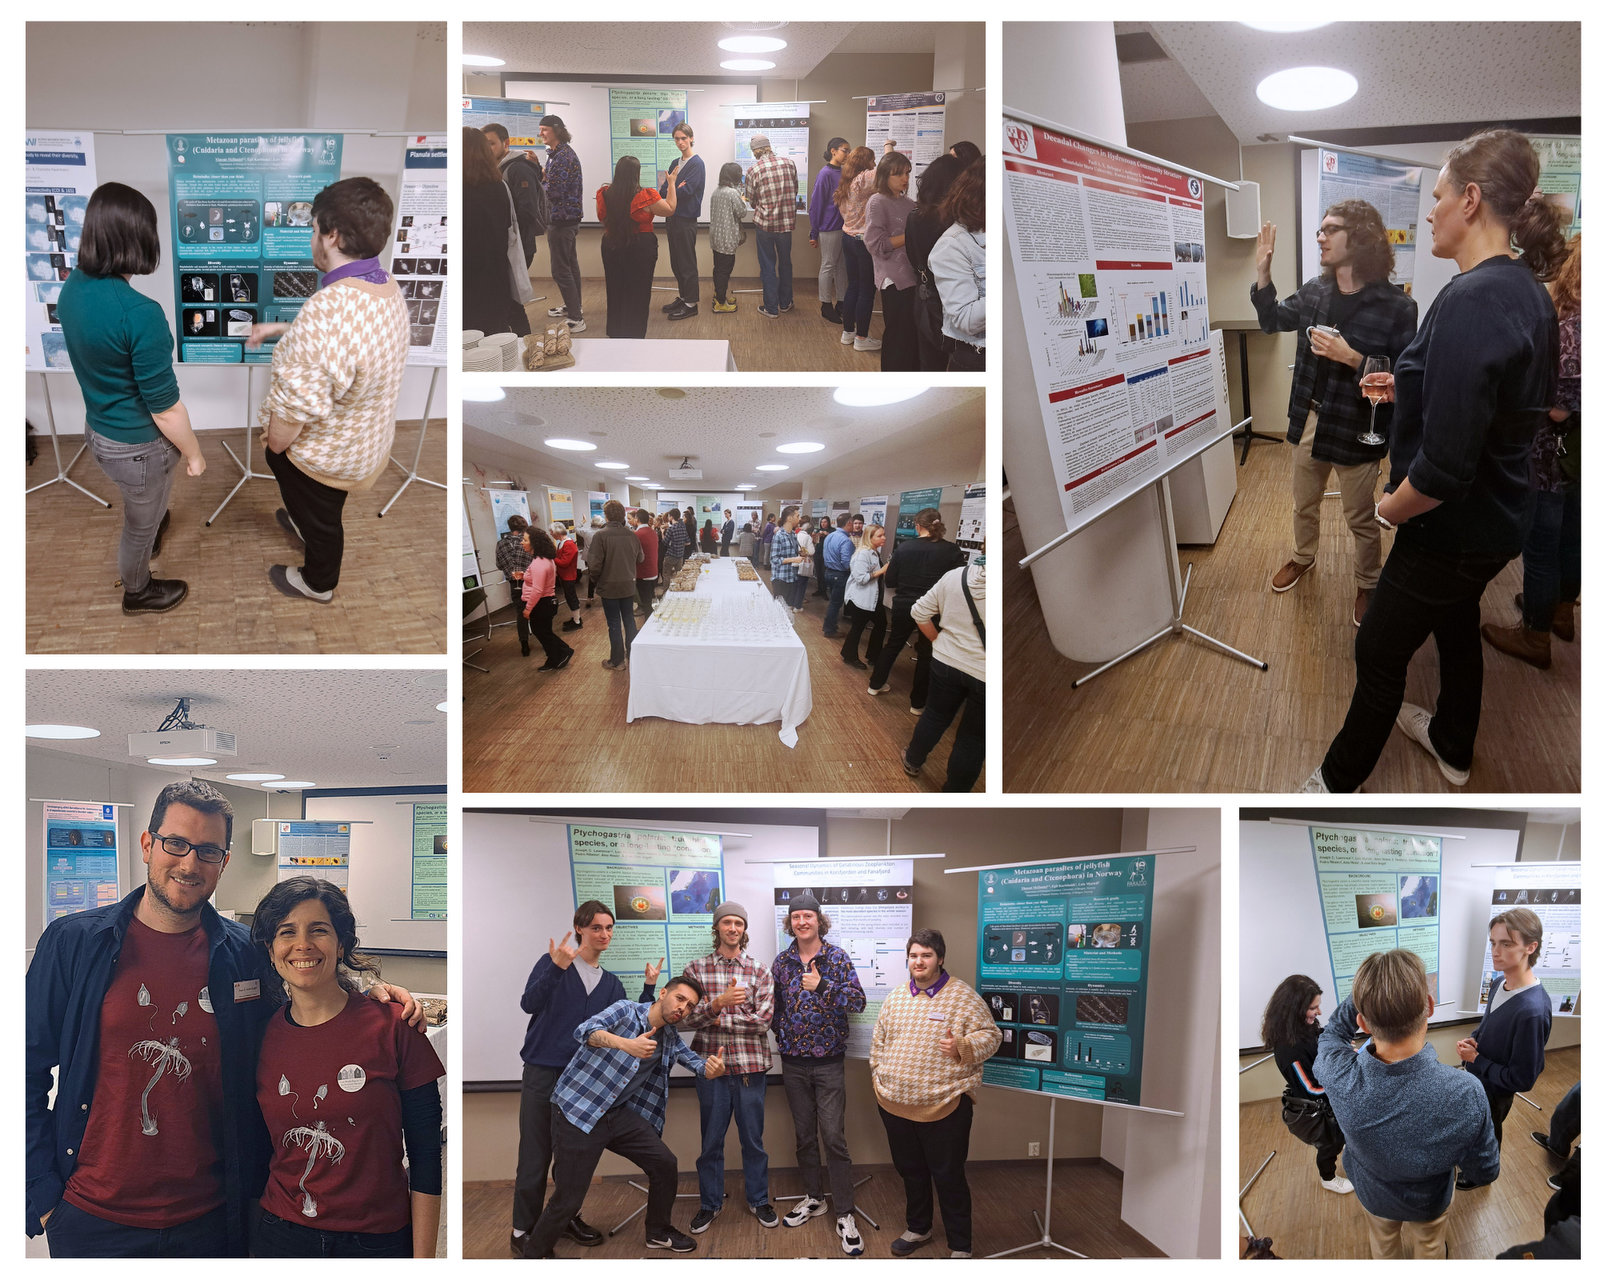 Several images showing people studying large (A0) scientific posters presenting results of their research and projects.